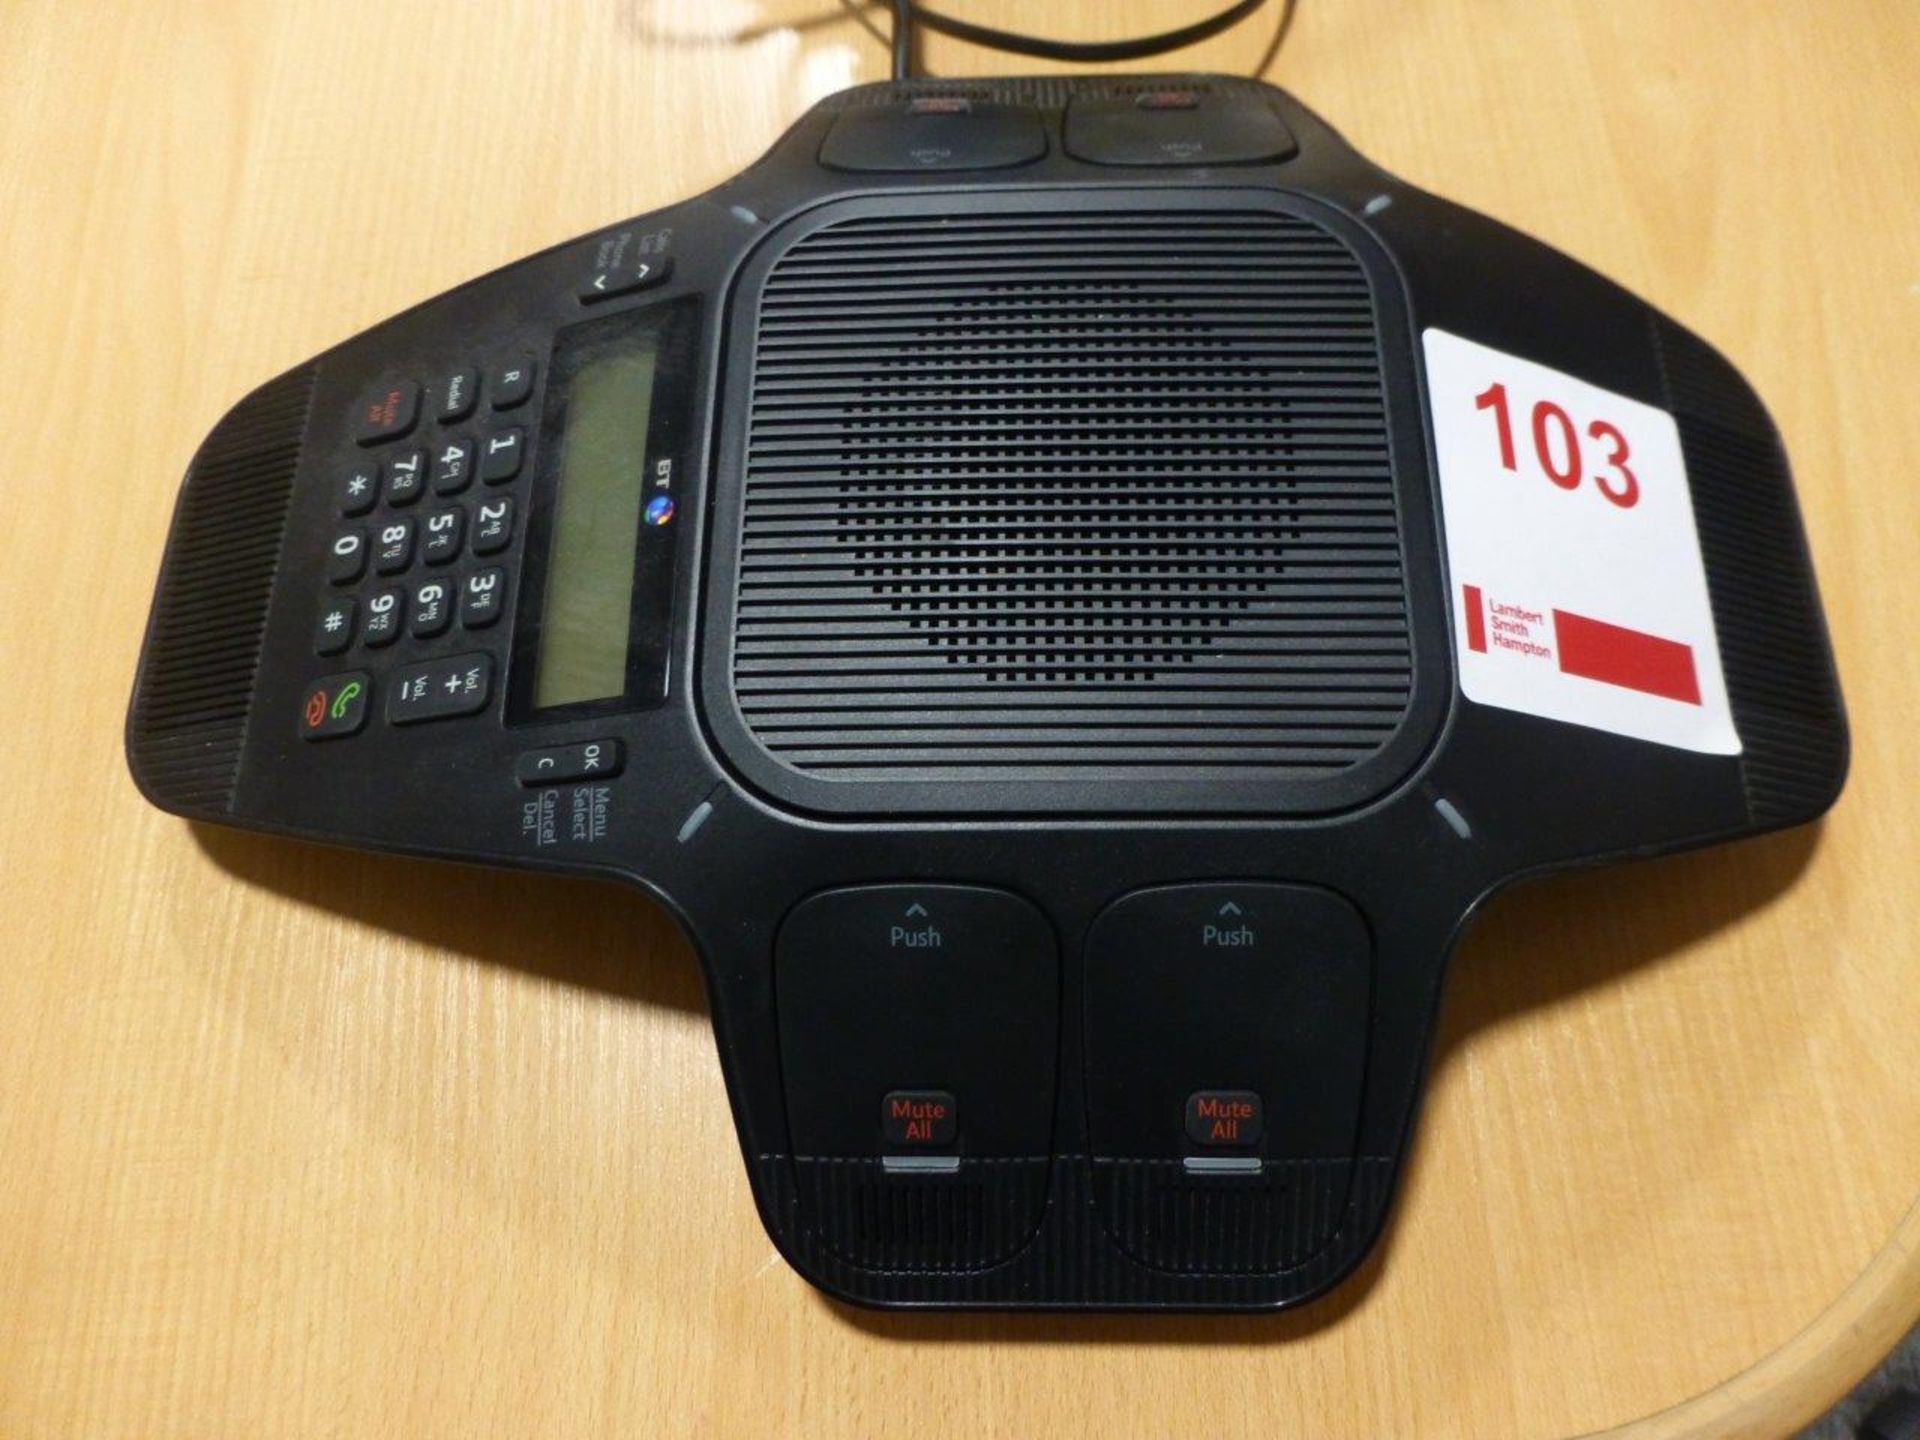 BT X500 telephone conferencing unit